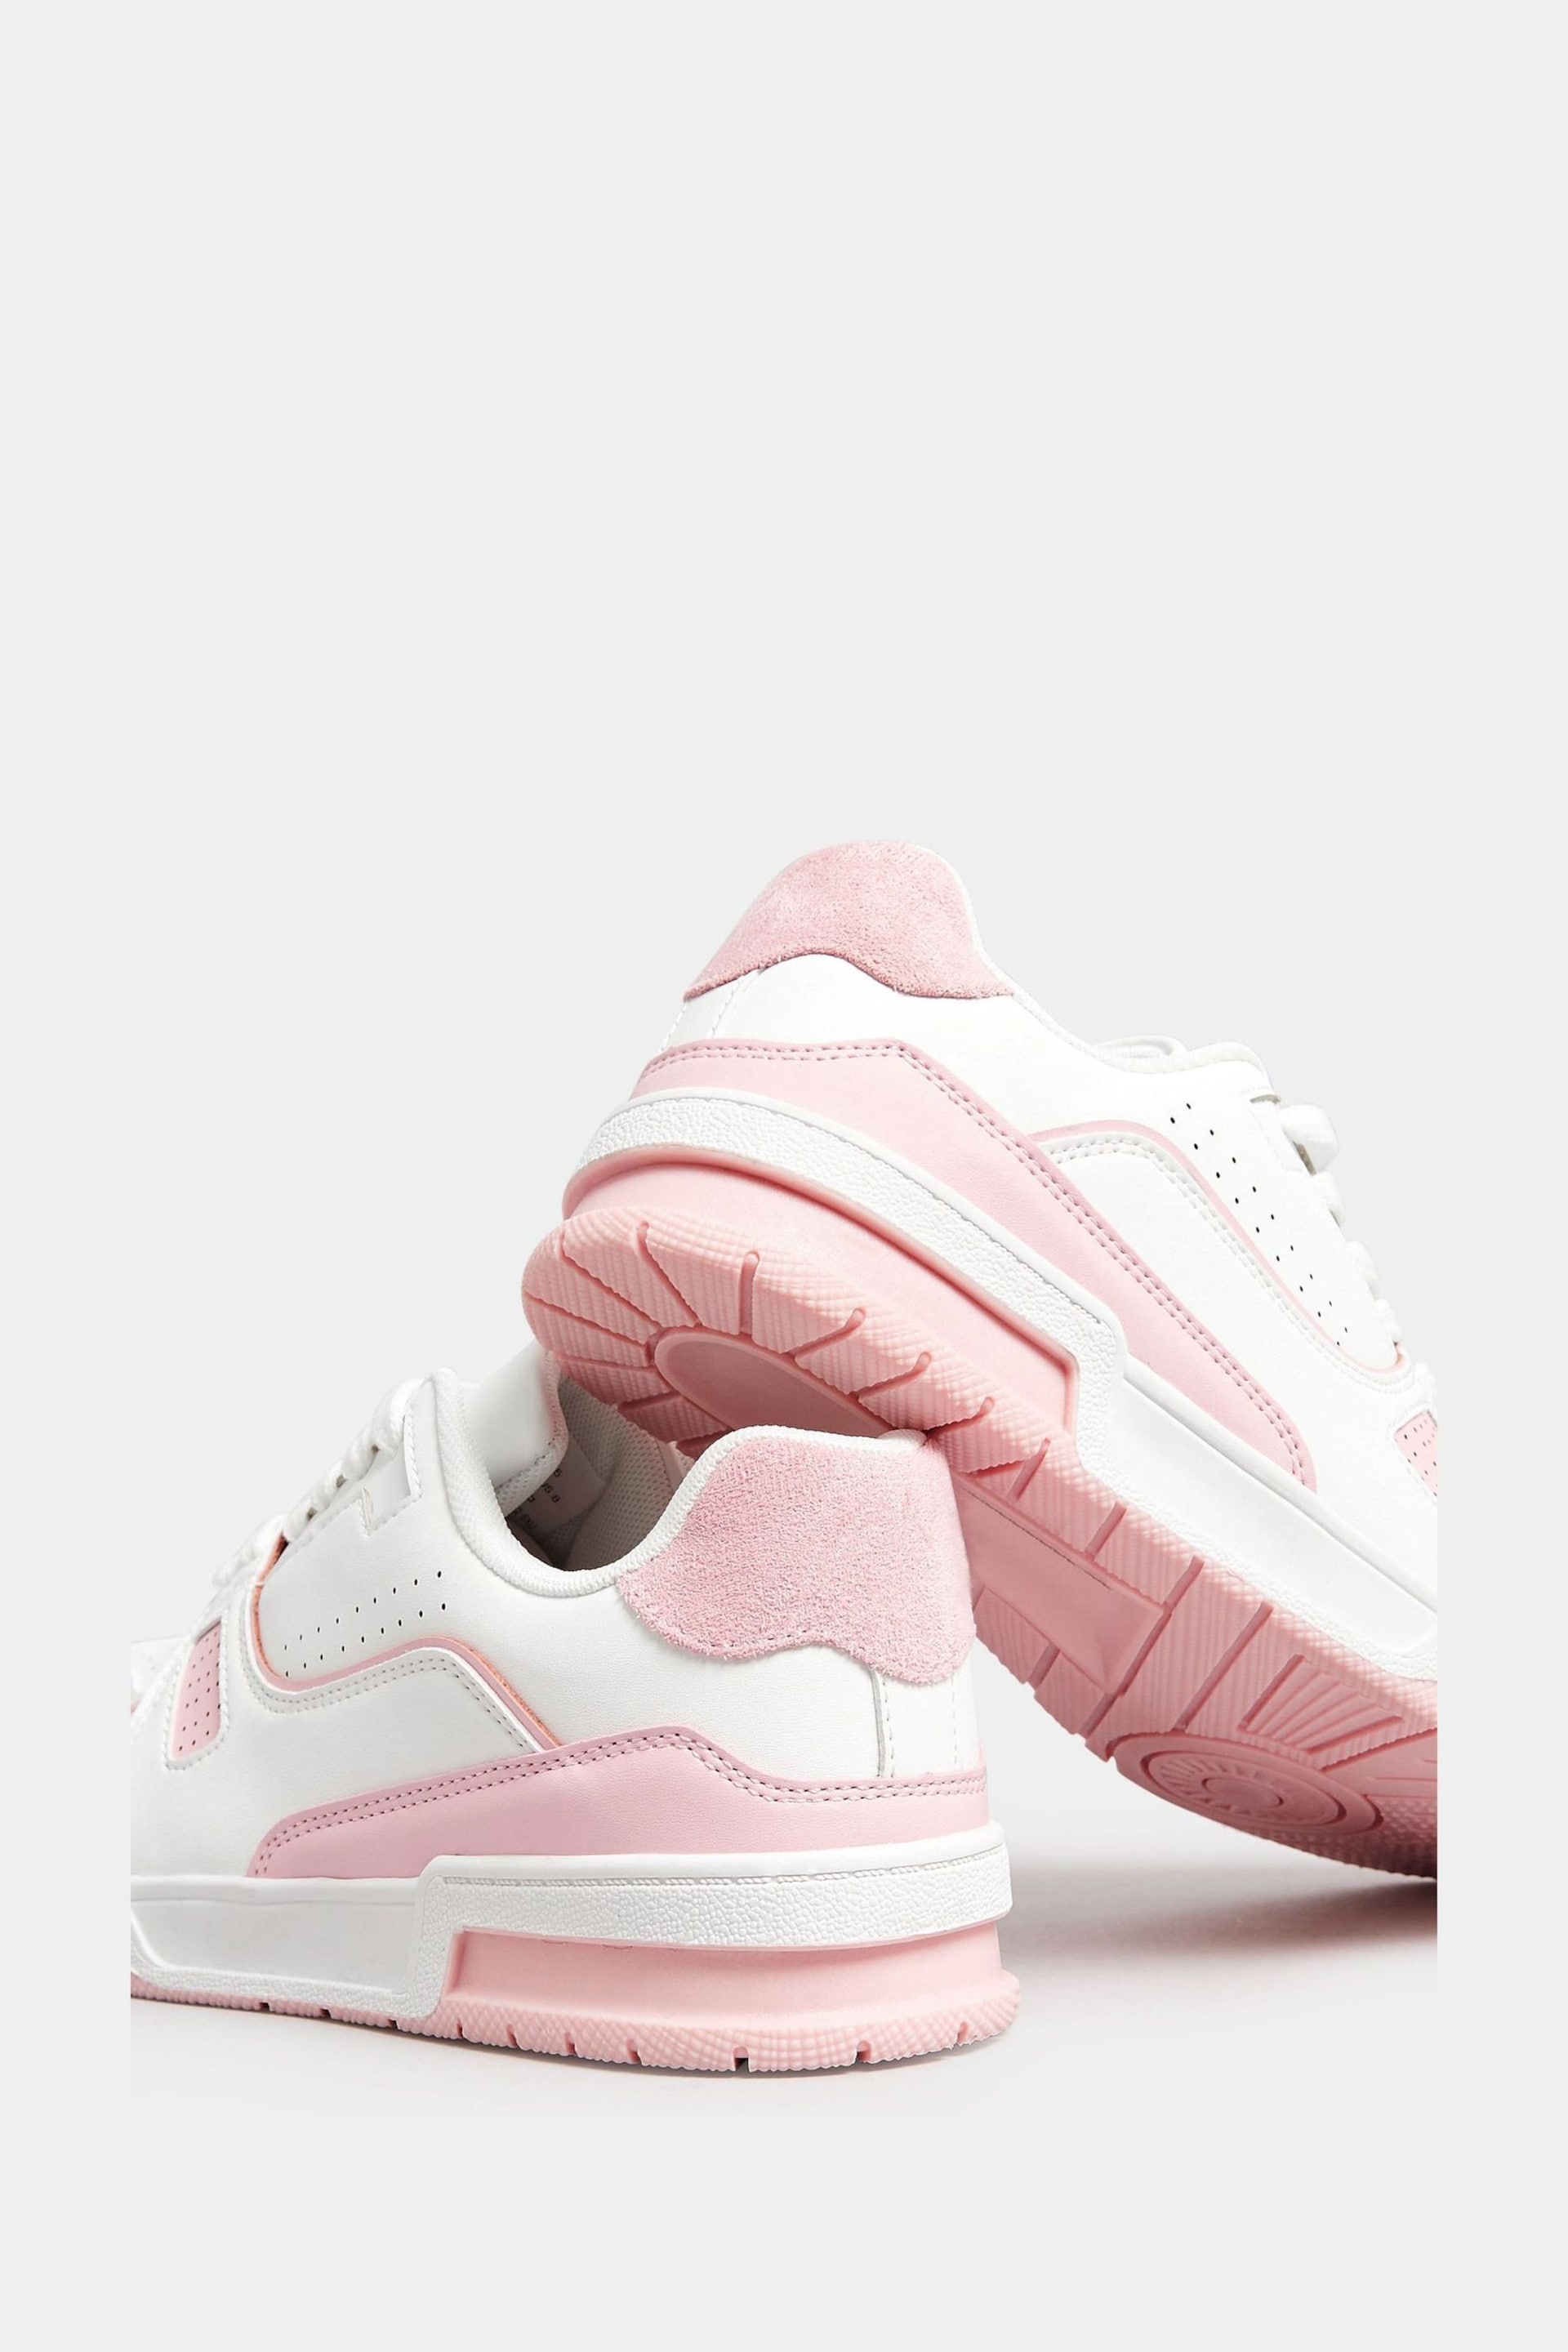 Yours Curve Pink Extra-Wide Fit Colour Block Trainer - Image 4 of 5